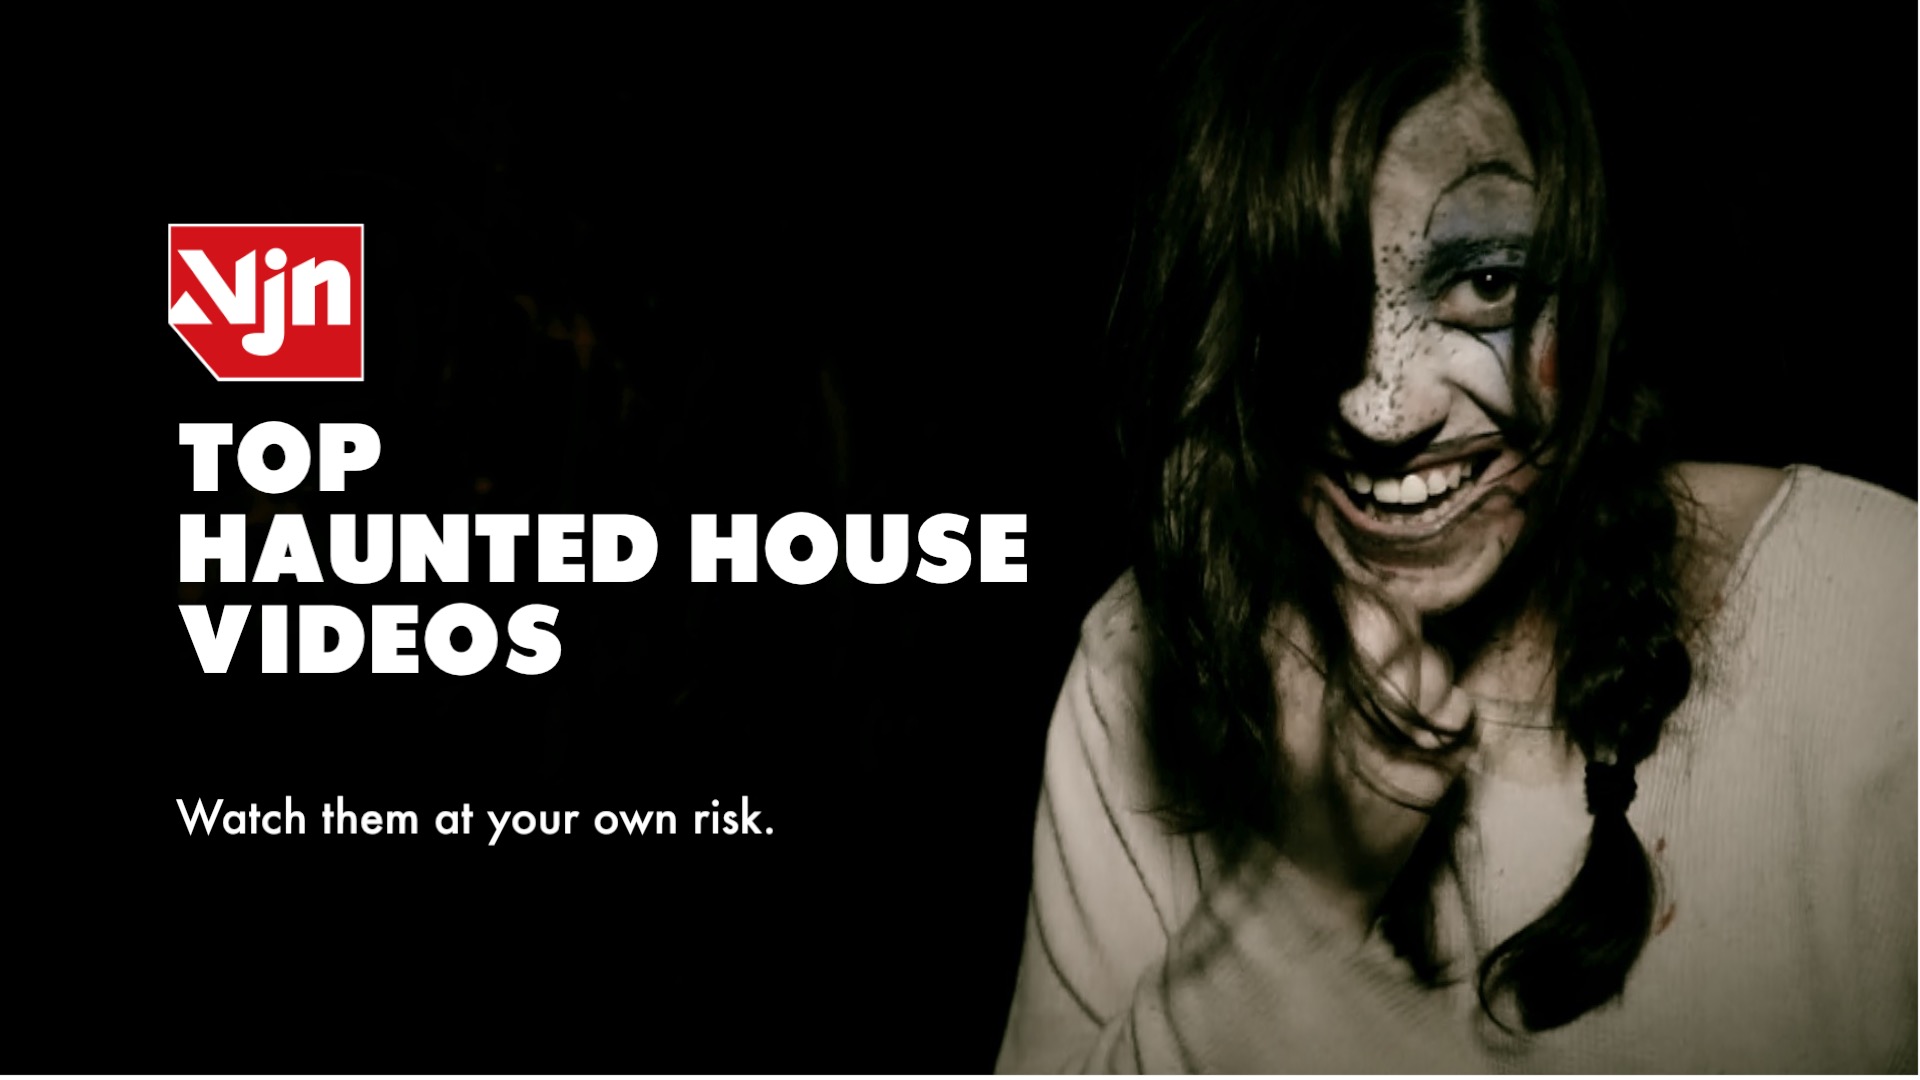 Top Haunted House Videos